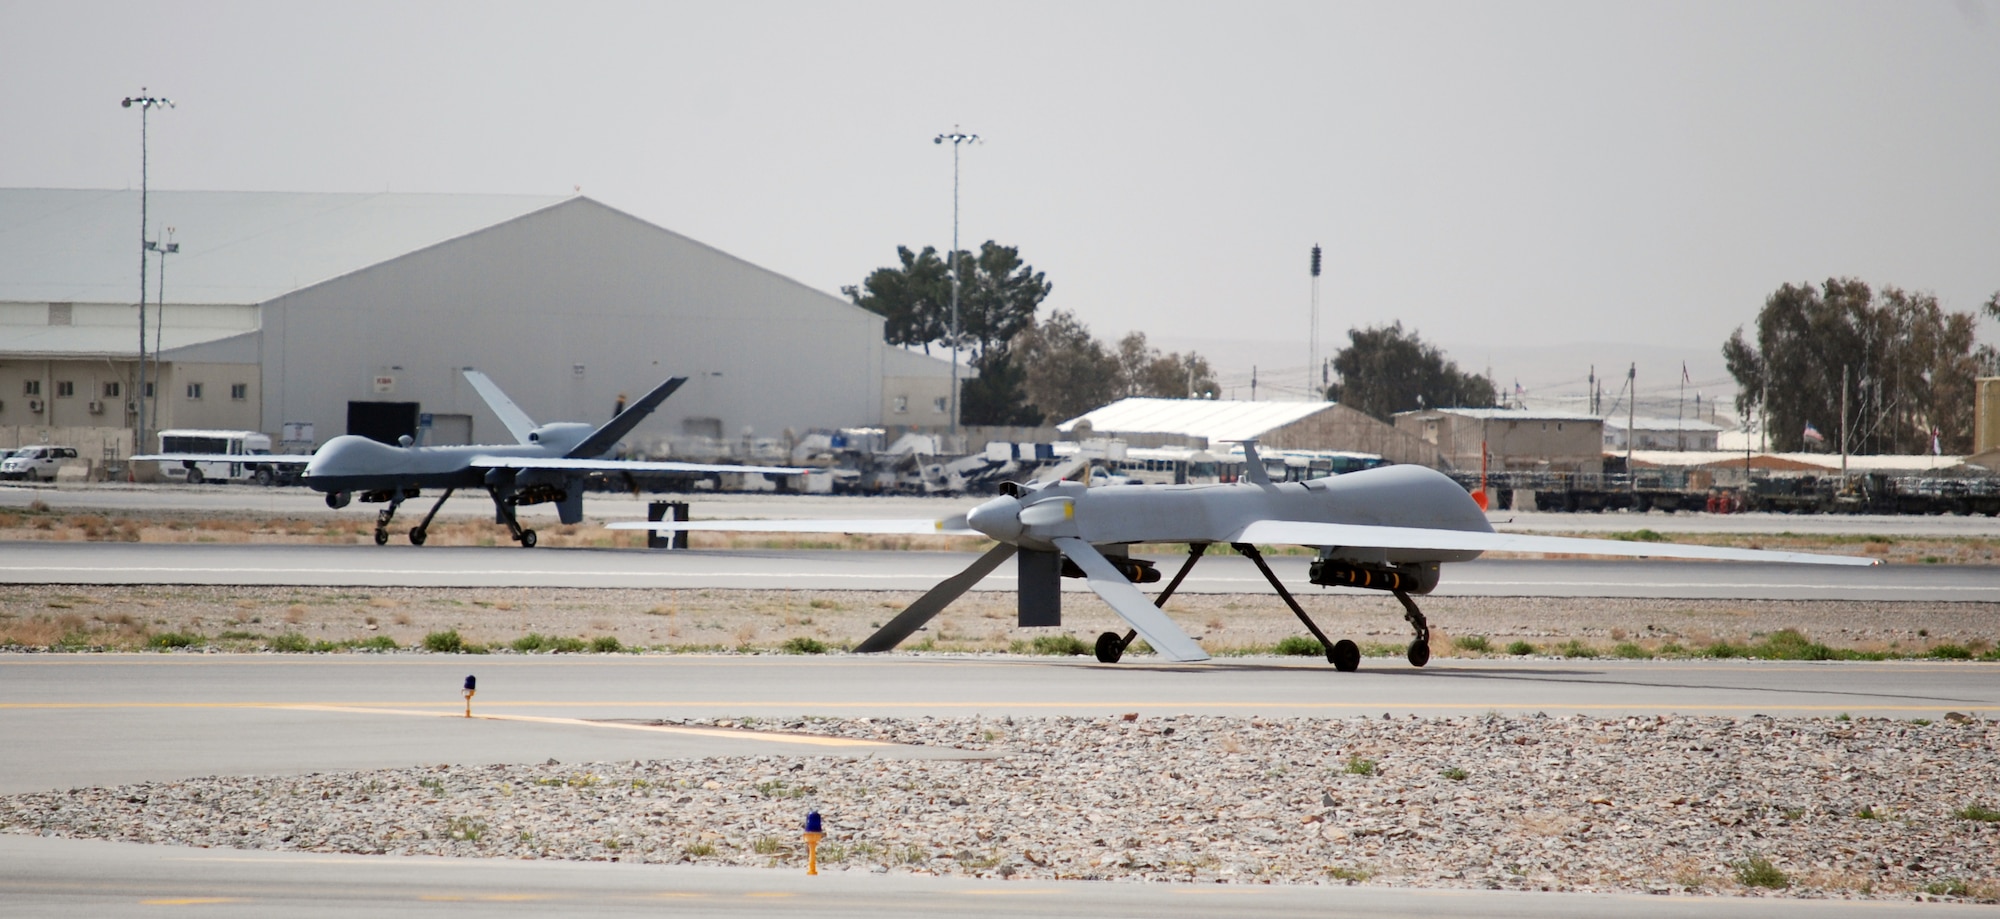 An MQ-1 Predator taxis as an MQ-9 Reaper lands at Kandahar Airfield, March 20, 2014. The MQ-1 and MQ-9 are assigned to and operated by the 451st Air Expeditionary Group. (U.S. Air Force photo by Capt. Brian Wagner/Released) (Image was cropped to emphasize aircraft.)